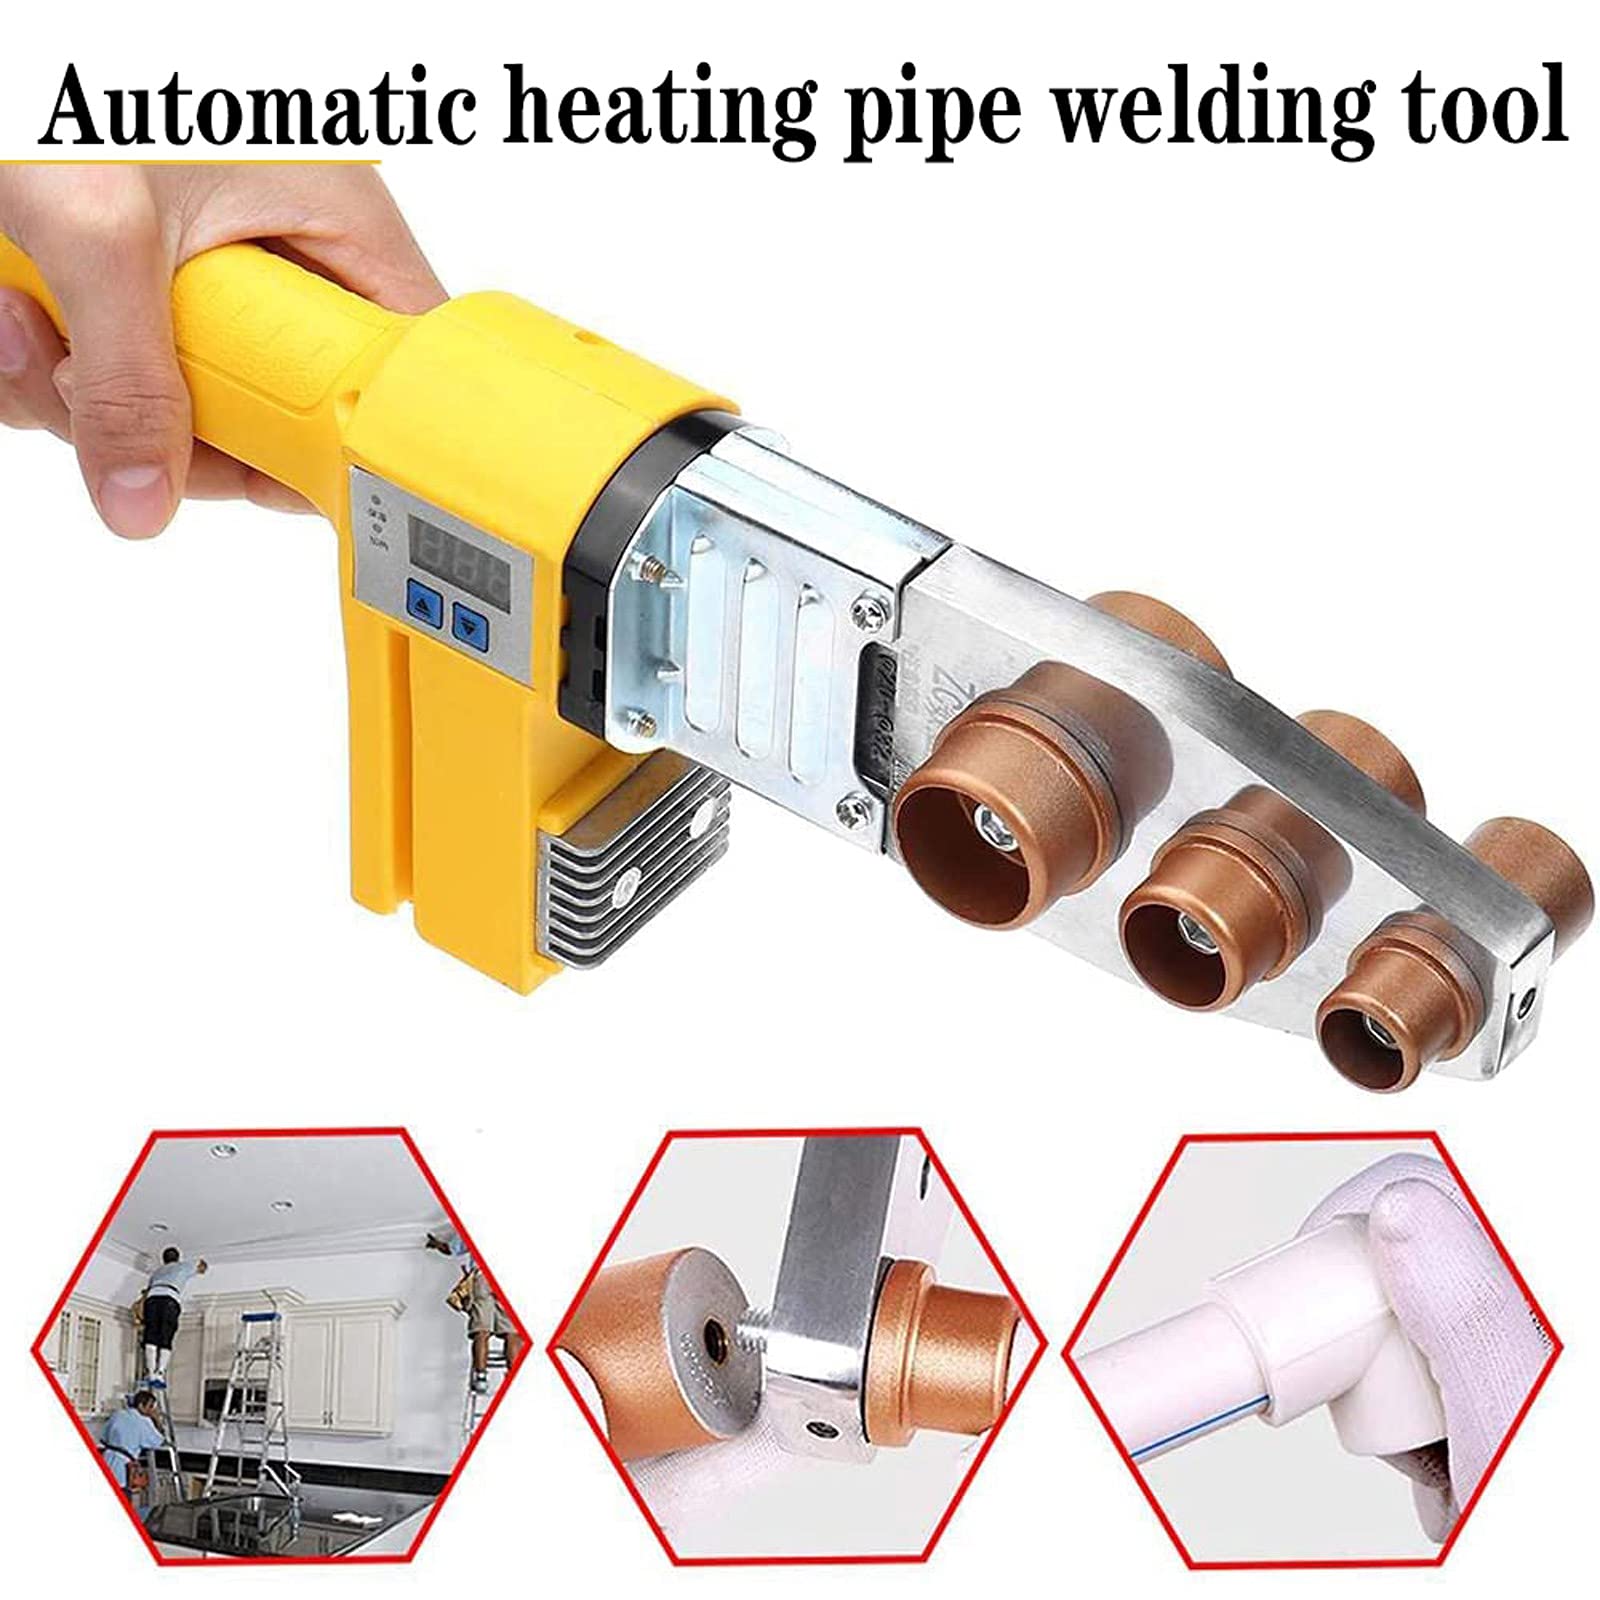 Plastic pipe welding tool，Plastic welder kit Contains welding heads of 6 diameters，Water Pipe Welding Machine Electric Heating Hot Melt Tools for PPR PE Tube 1000W 220V